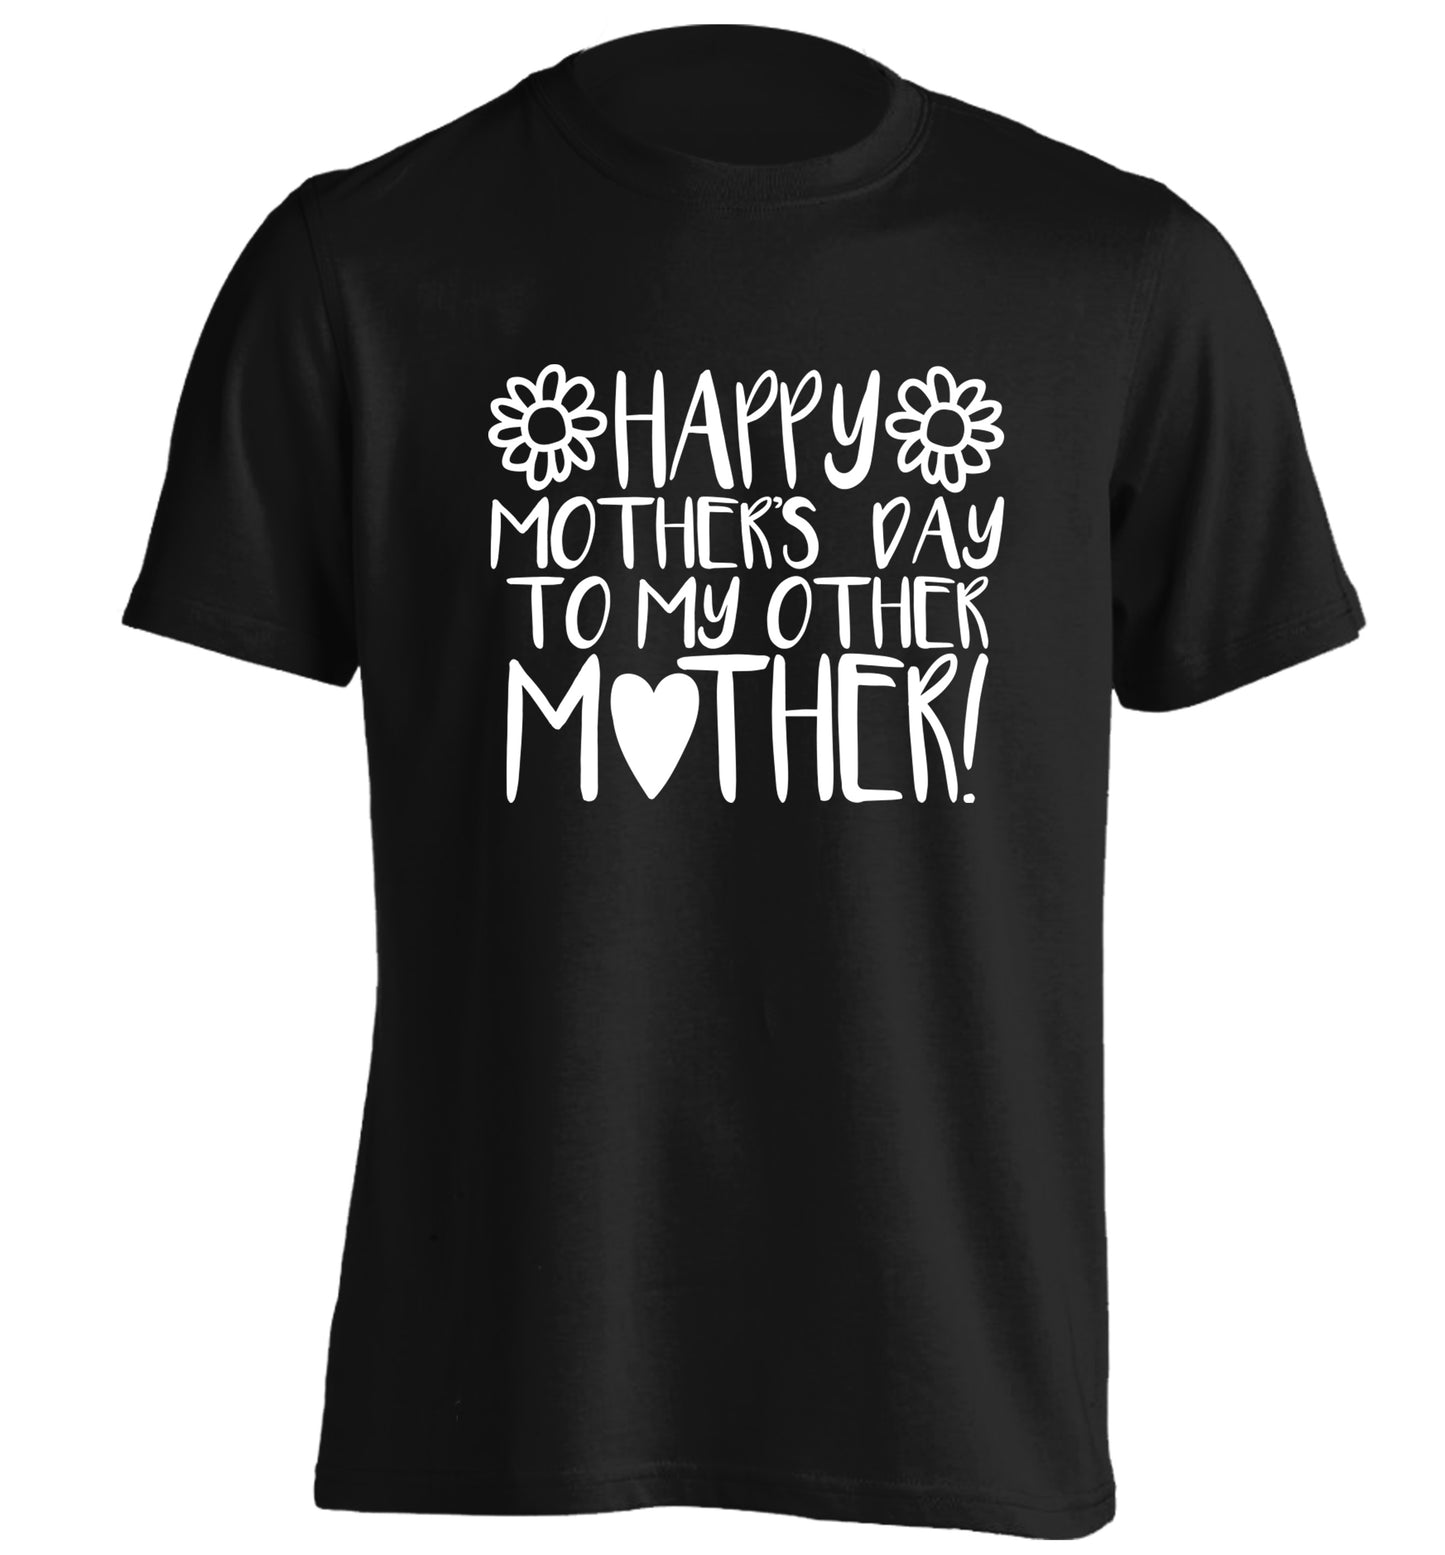 Happy mother's day to my other mother adults unisex black Tshirt 2XL